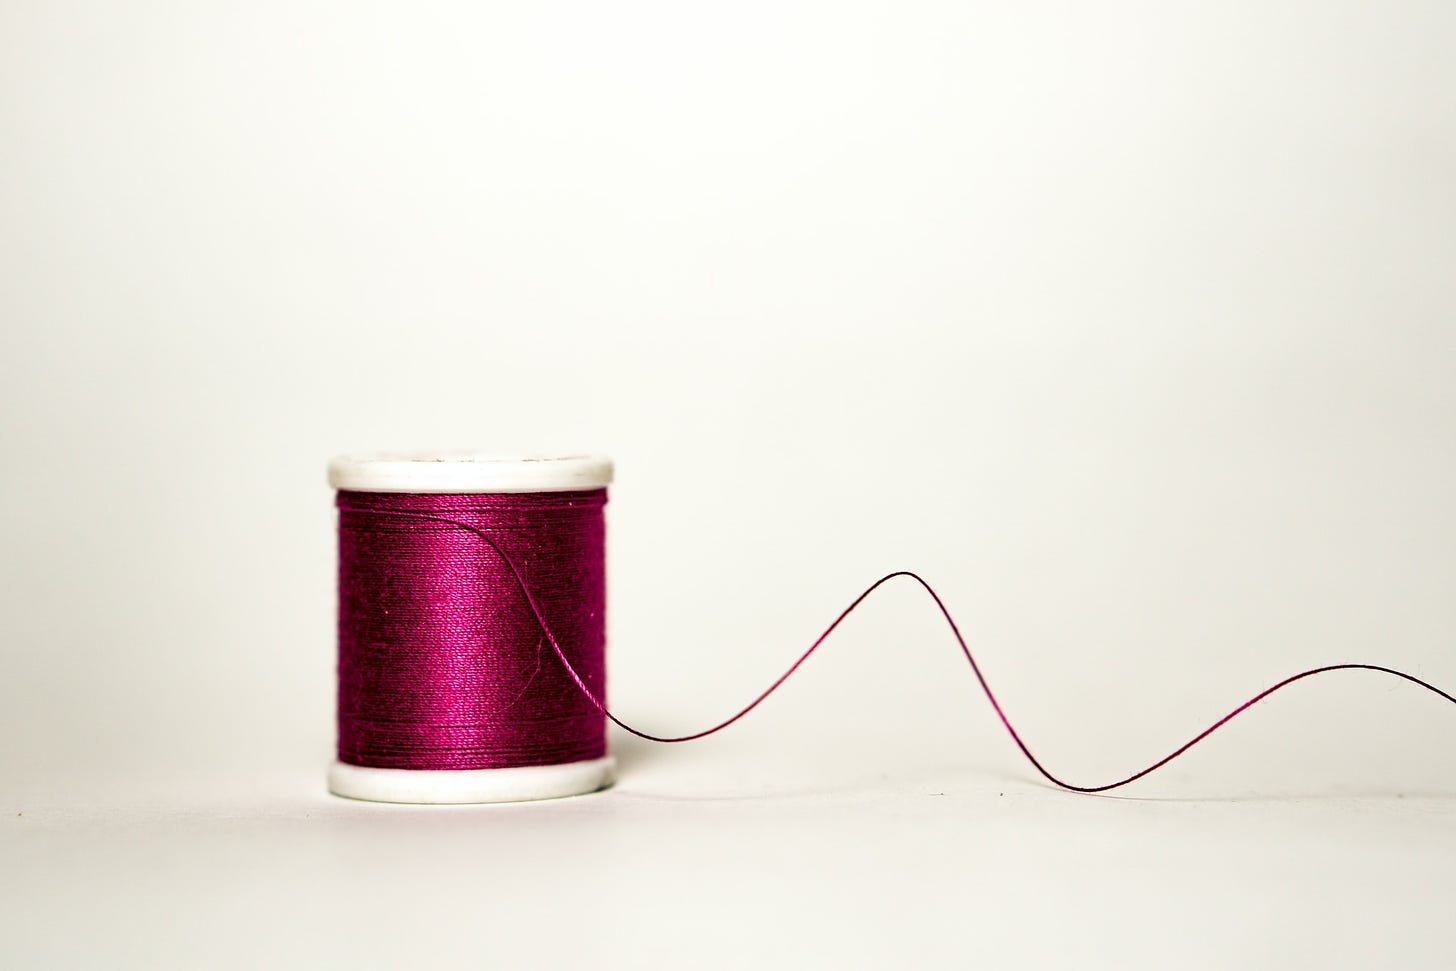 A spool of purple thread with one strand curving off from it.